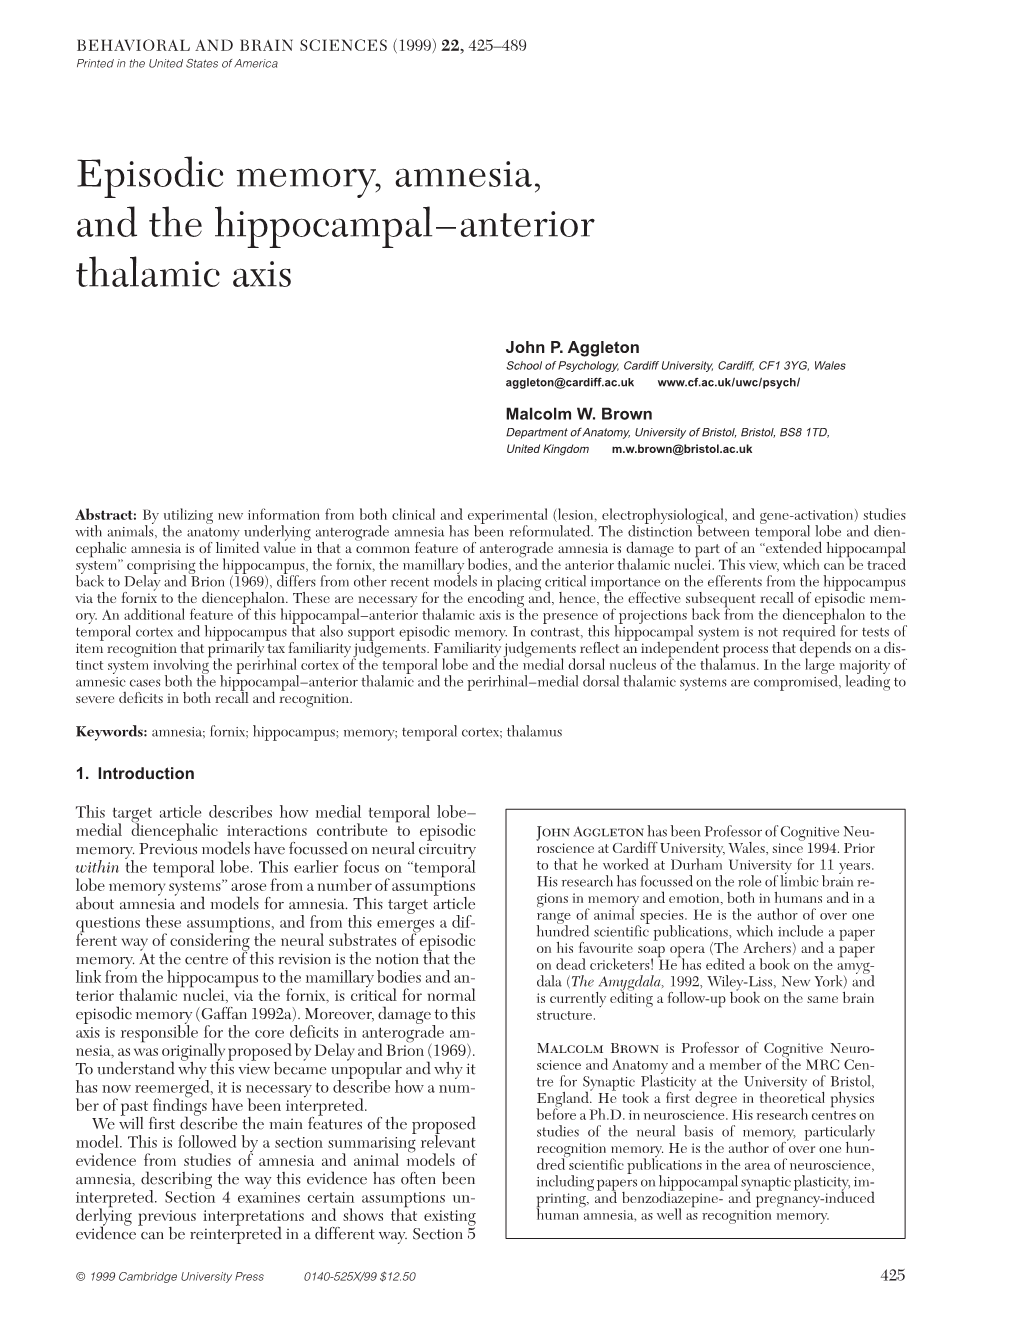 Episodic Memory, Amnesia, and the Hippocampal–Anterior Thalamic Axis